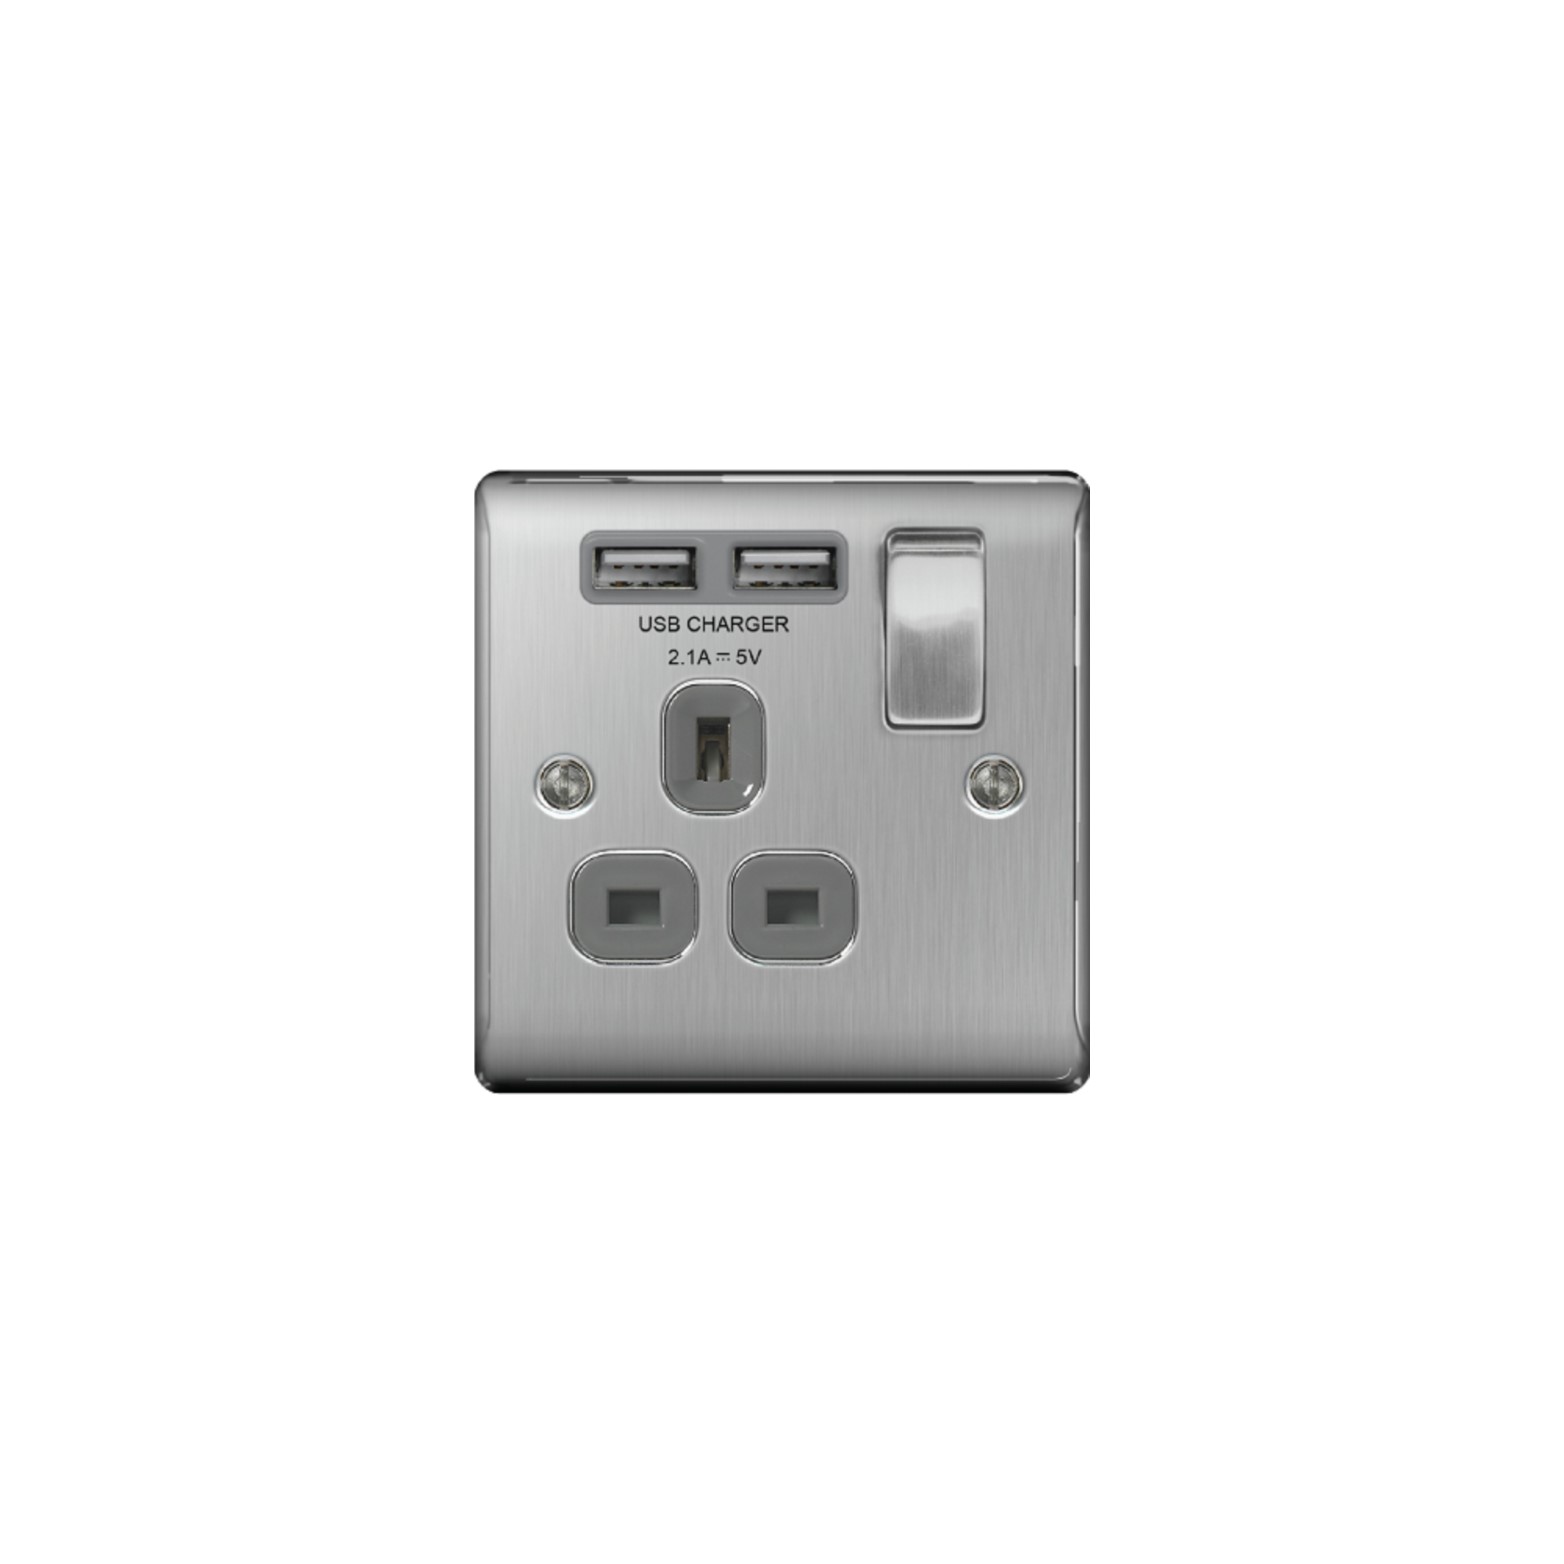 Nexus Brushed Steel 2USB 2.1A 1-Gang 13A Switched Wall Socket Grey Insert, USB Charger(NBS21U2G)